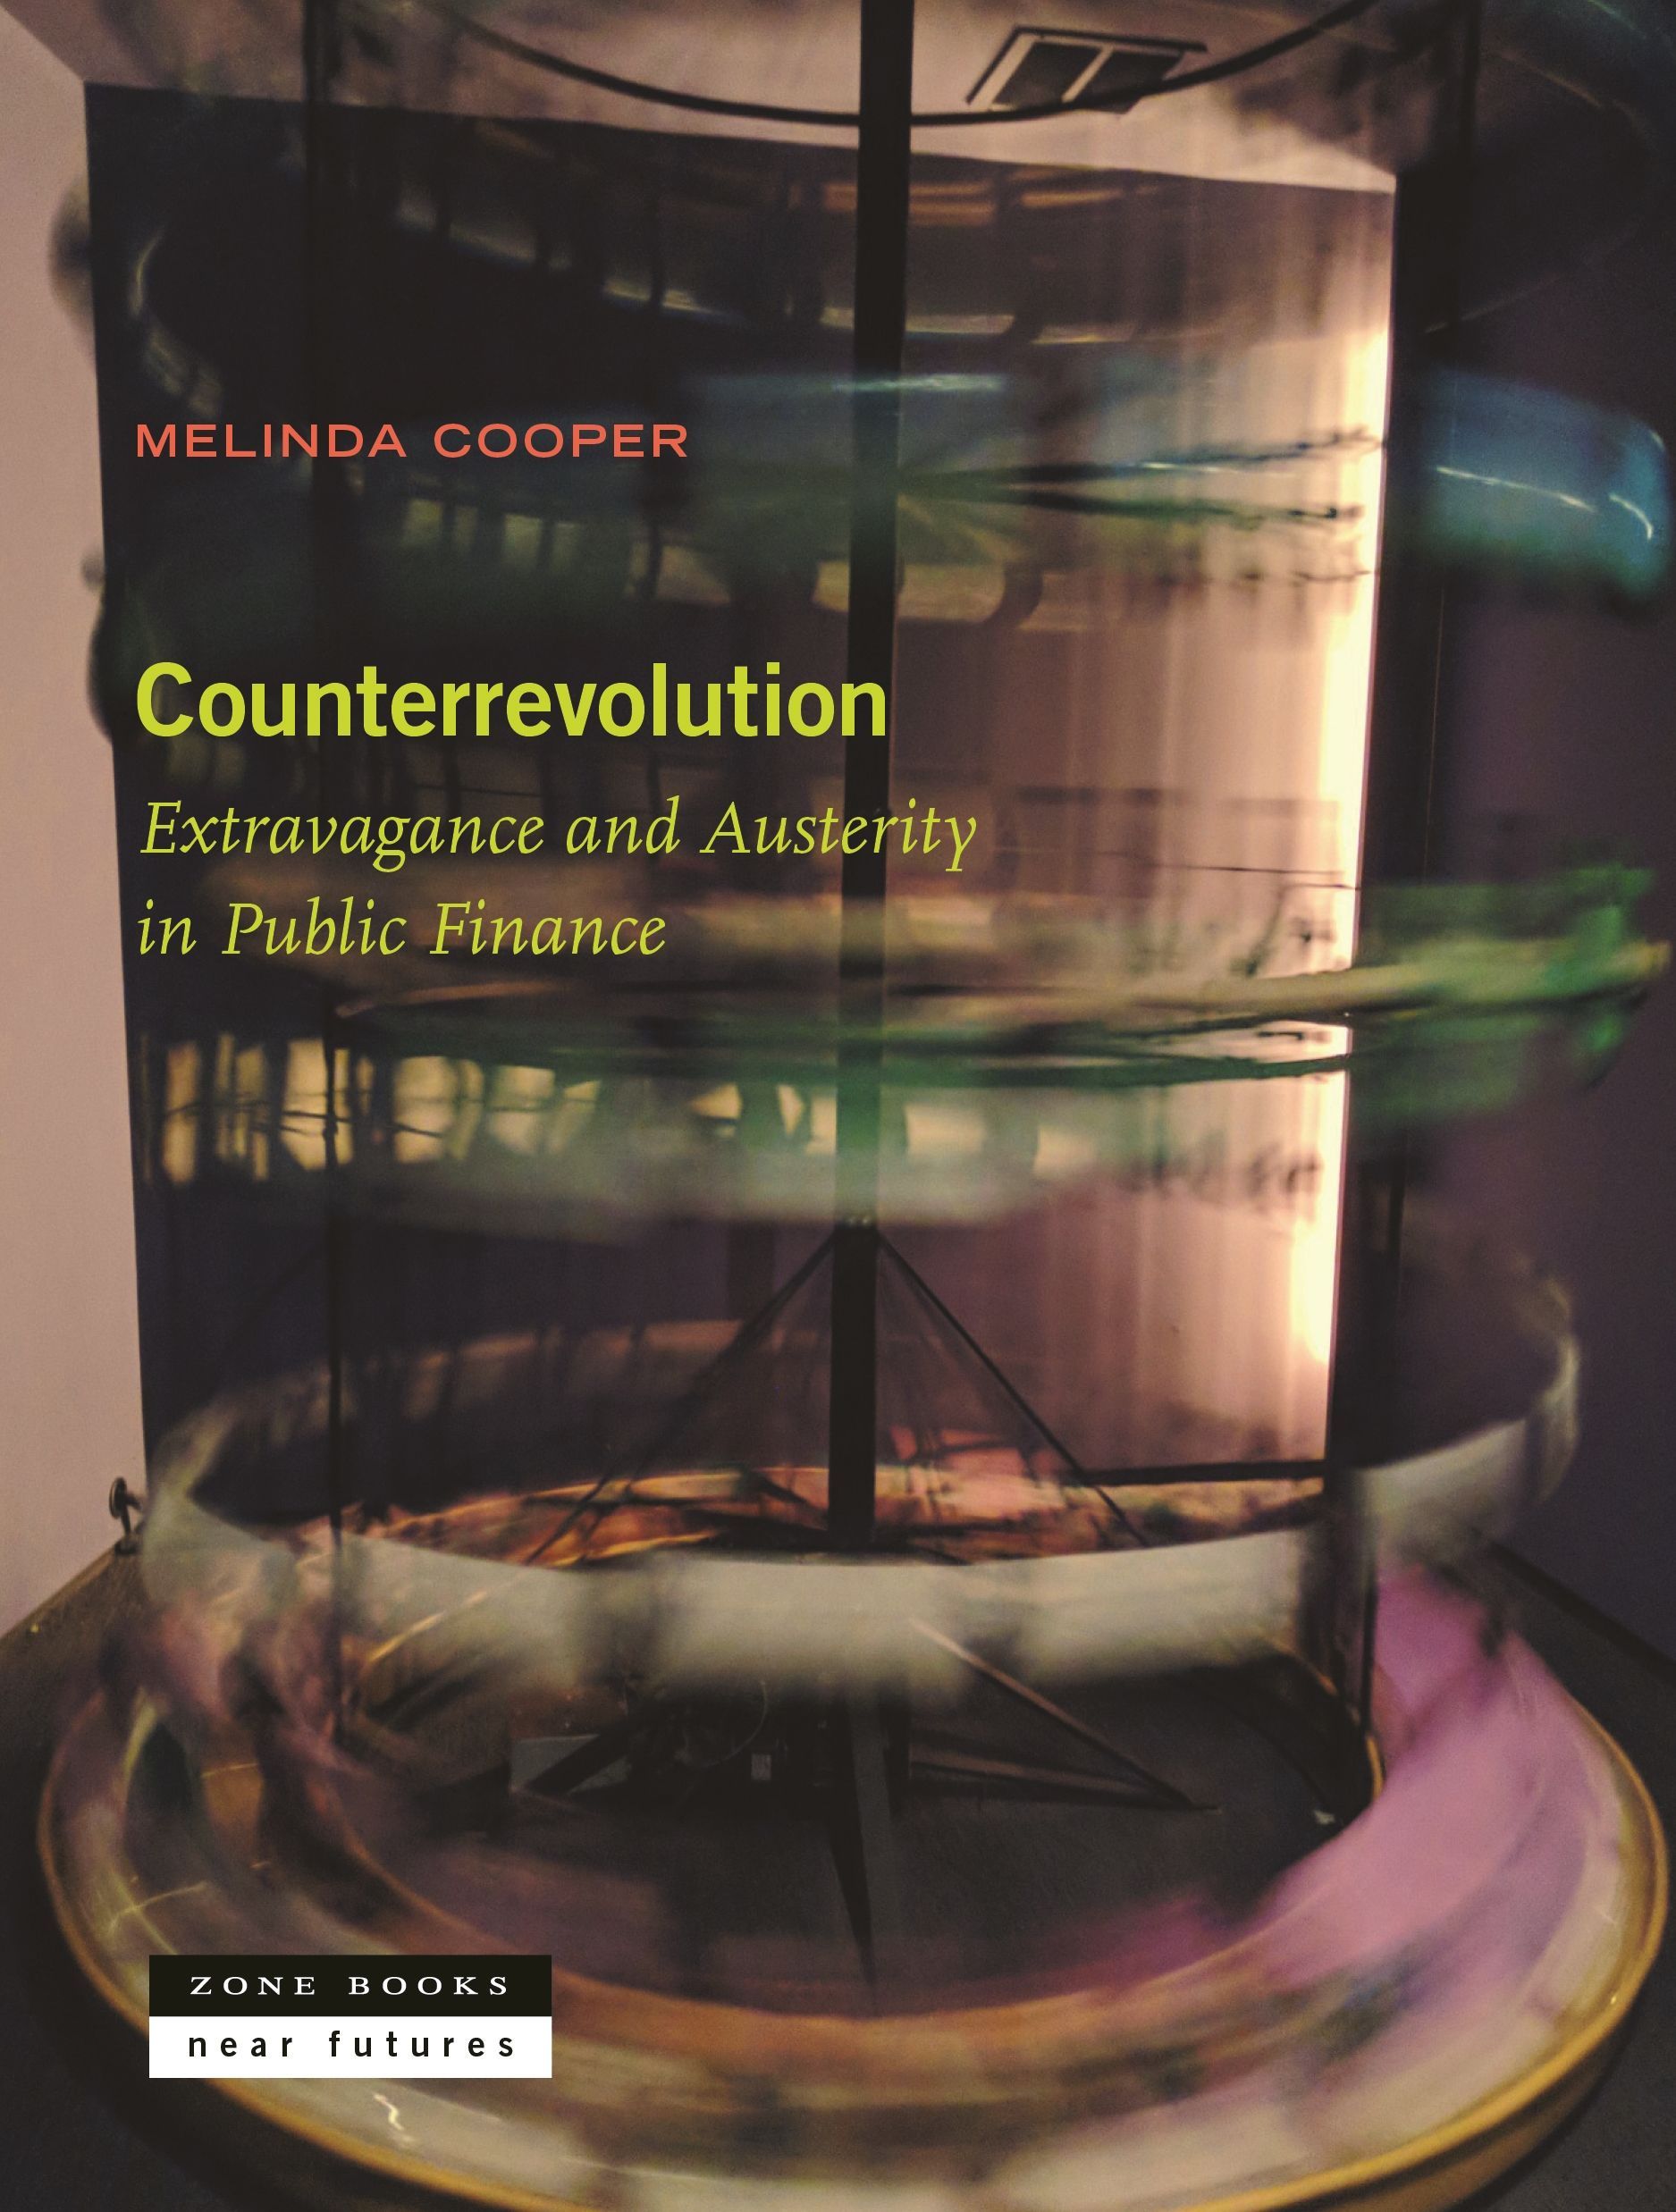 A Tax Haven in a Heartless World: On Melinda Cooper’s “Counterrevolution”